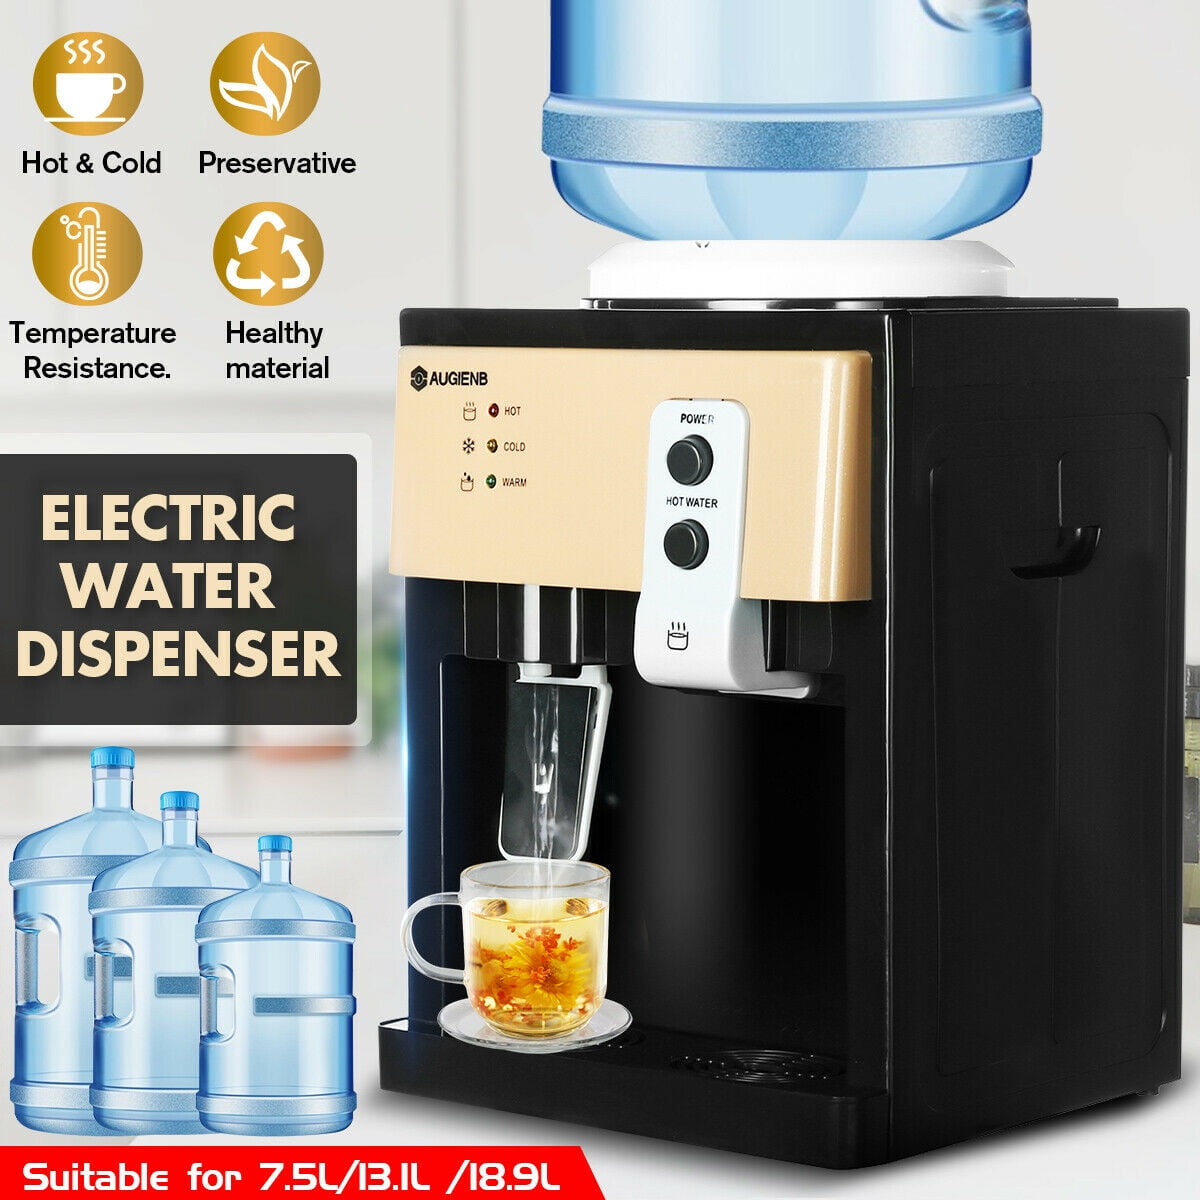 Stainless Steel Liner Countertop Water Dispenser Perfect For Offices And Meeting Rooms Table Top Loading Hot & Normal Temperature Water